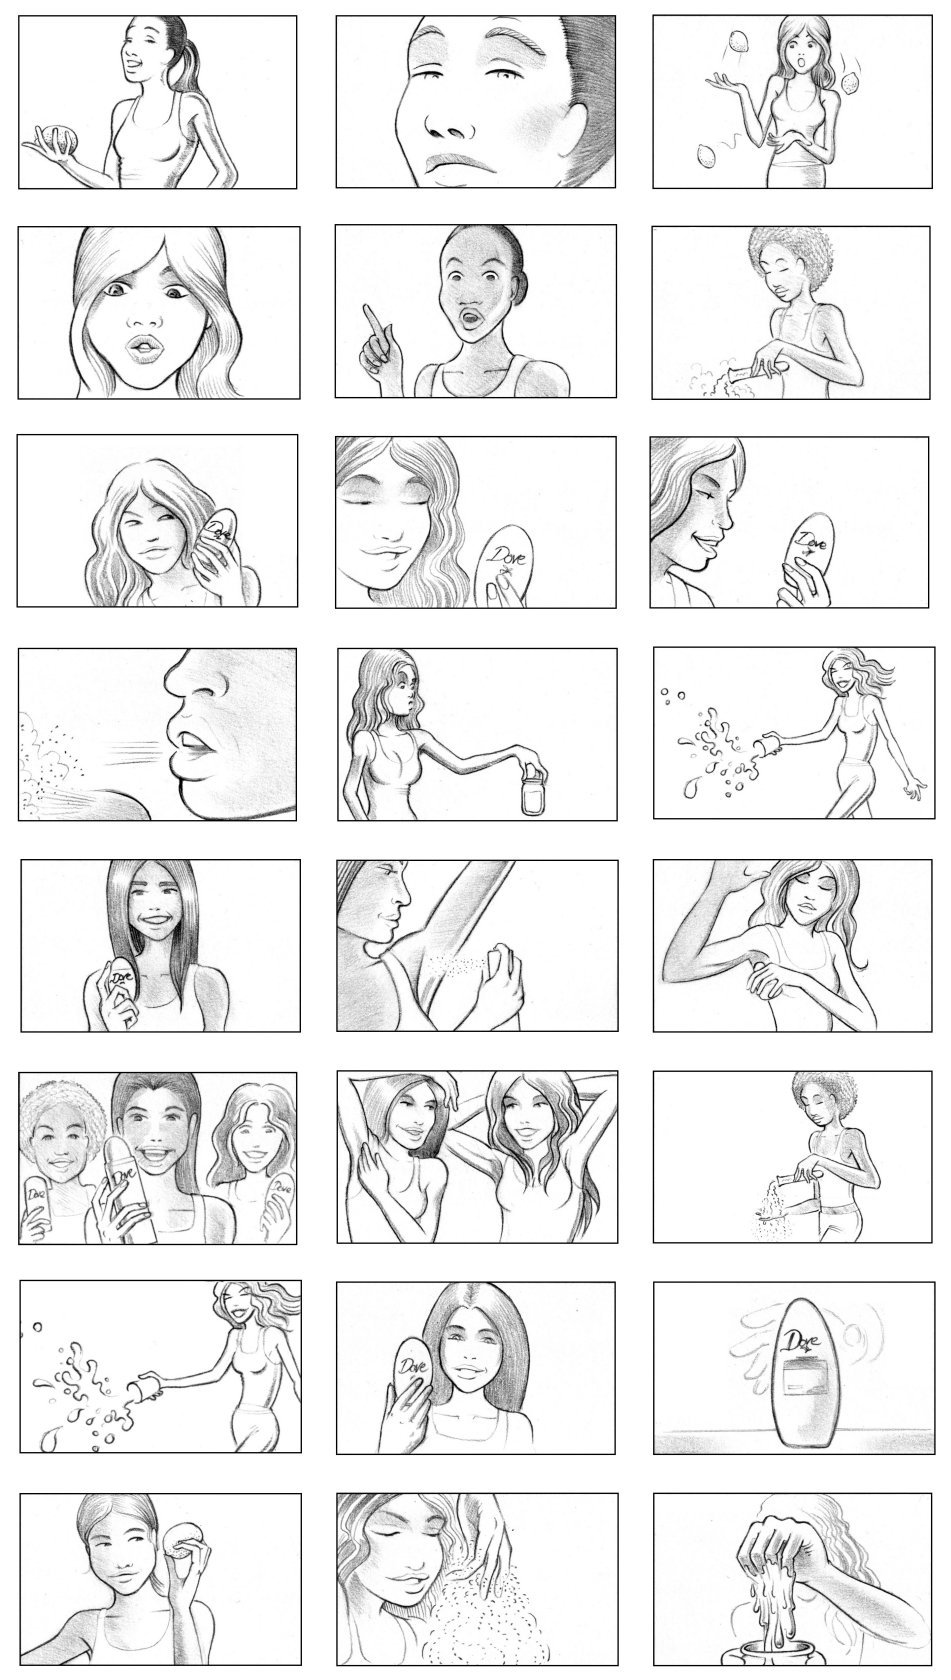 DOVE 'CLARABELLE' STORYBOARD BY ANDY SPARROW